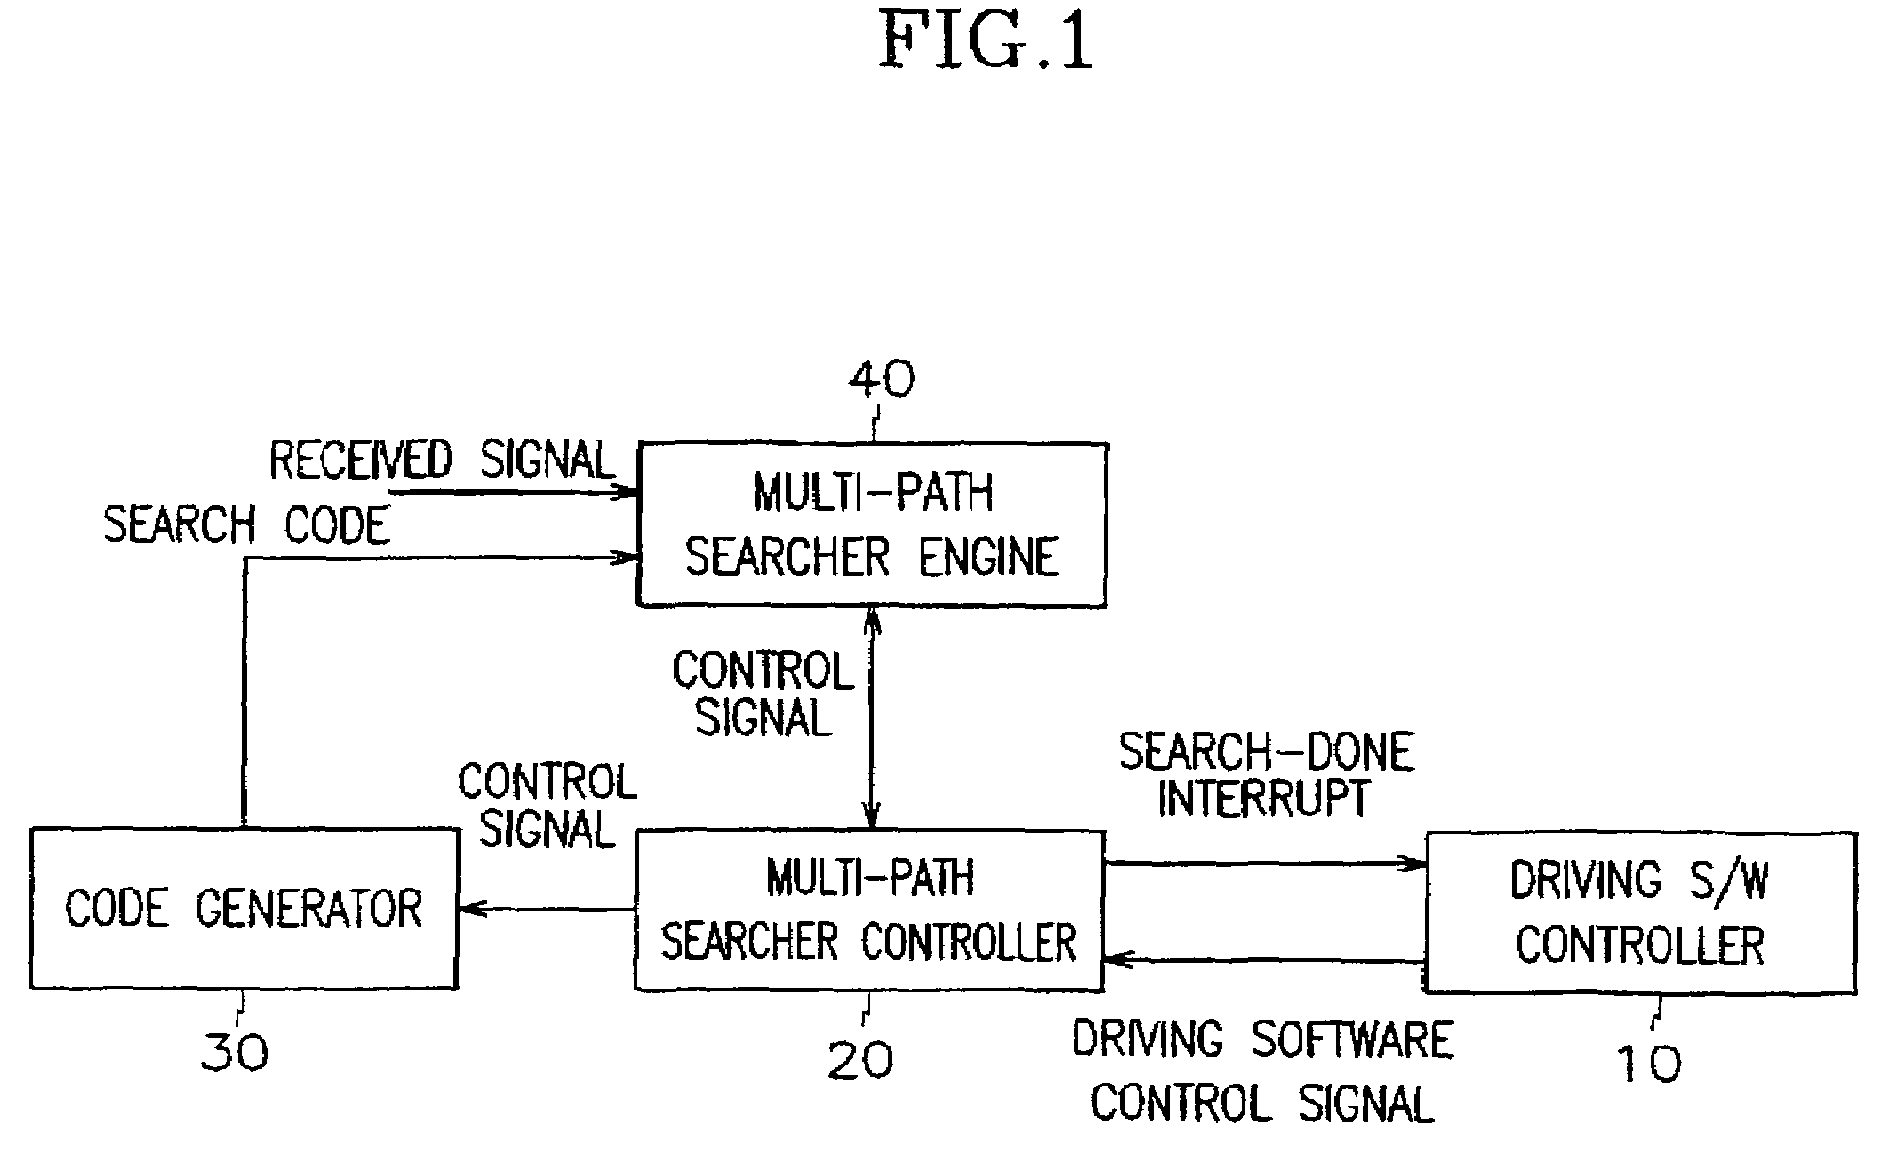 Apparatus and method for multi-path search using dual code generators